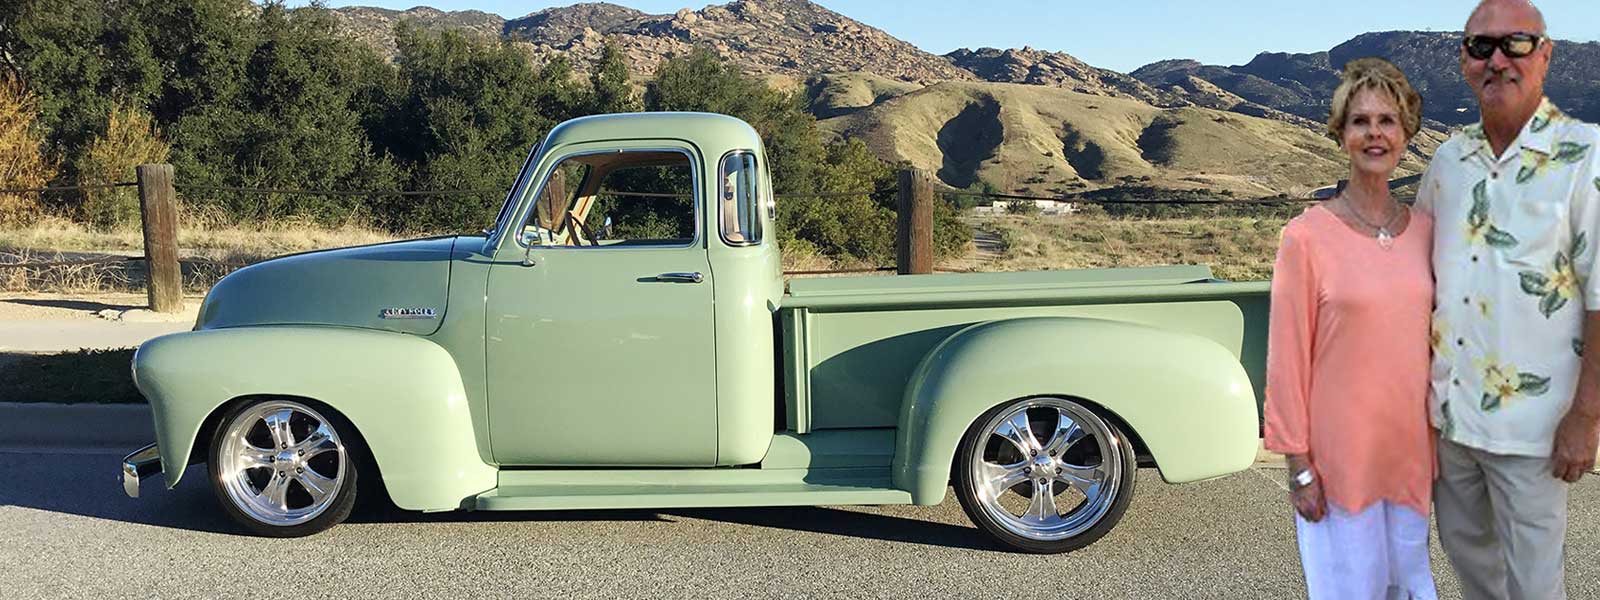 1952 Chevy 3100 Truck, Ken and Carol Brown